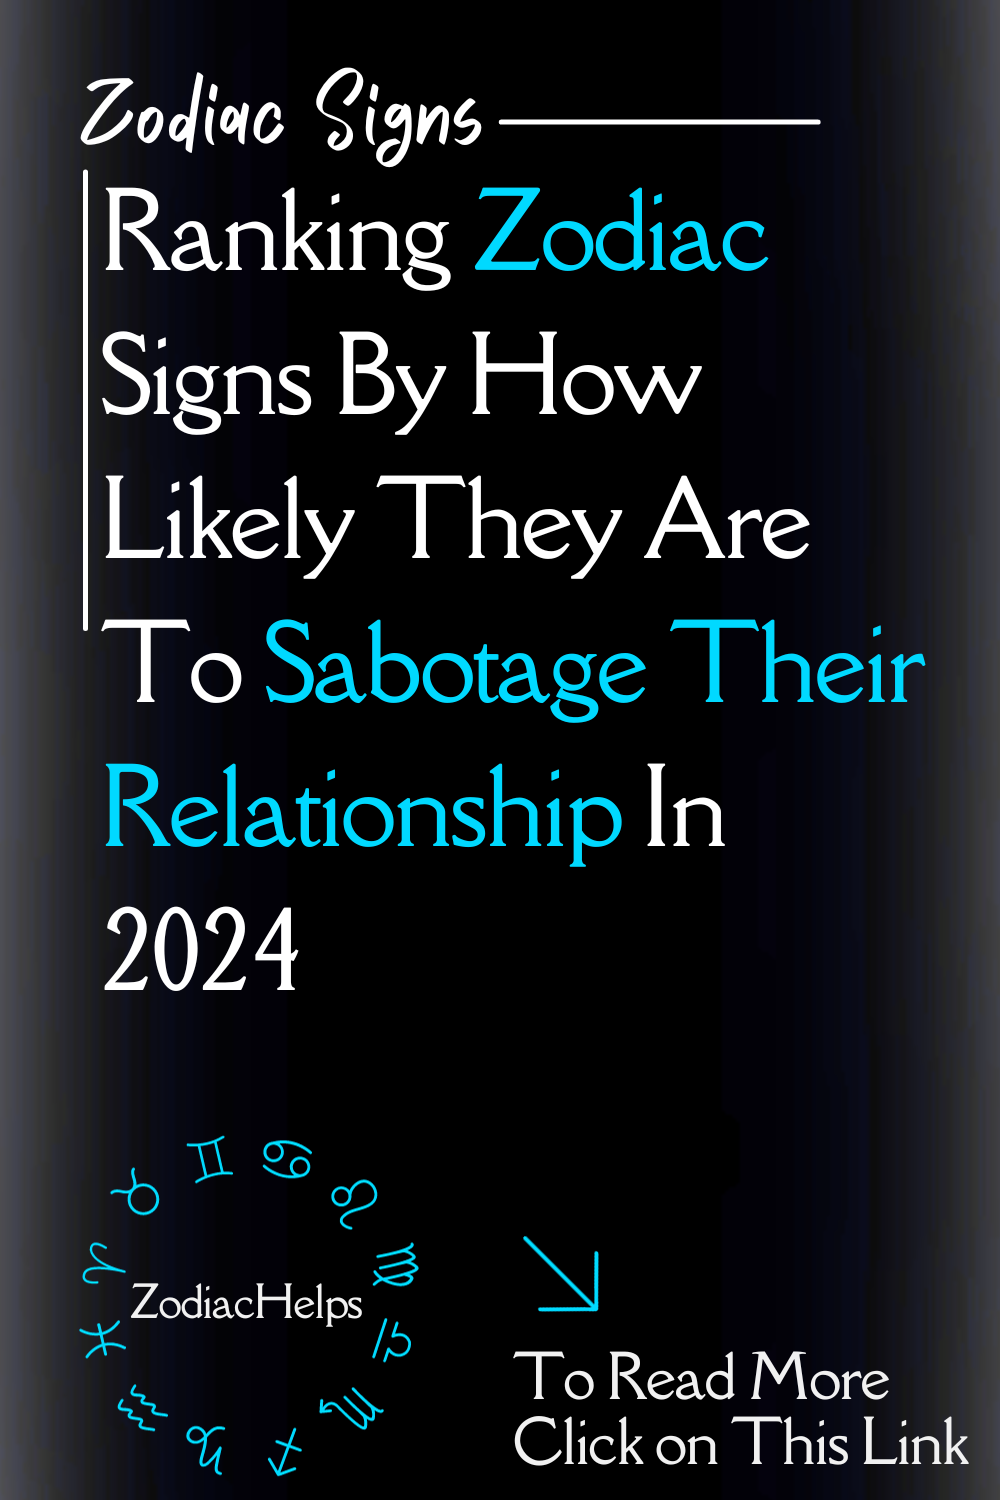 Ranking Zodiac Signs By How Likely They Are To Sabotage Their Relationship In 2024